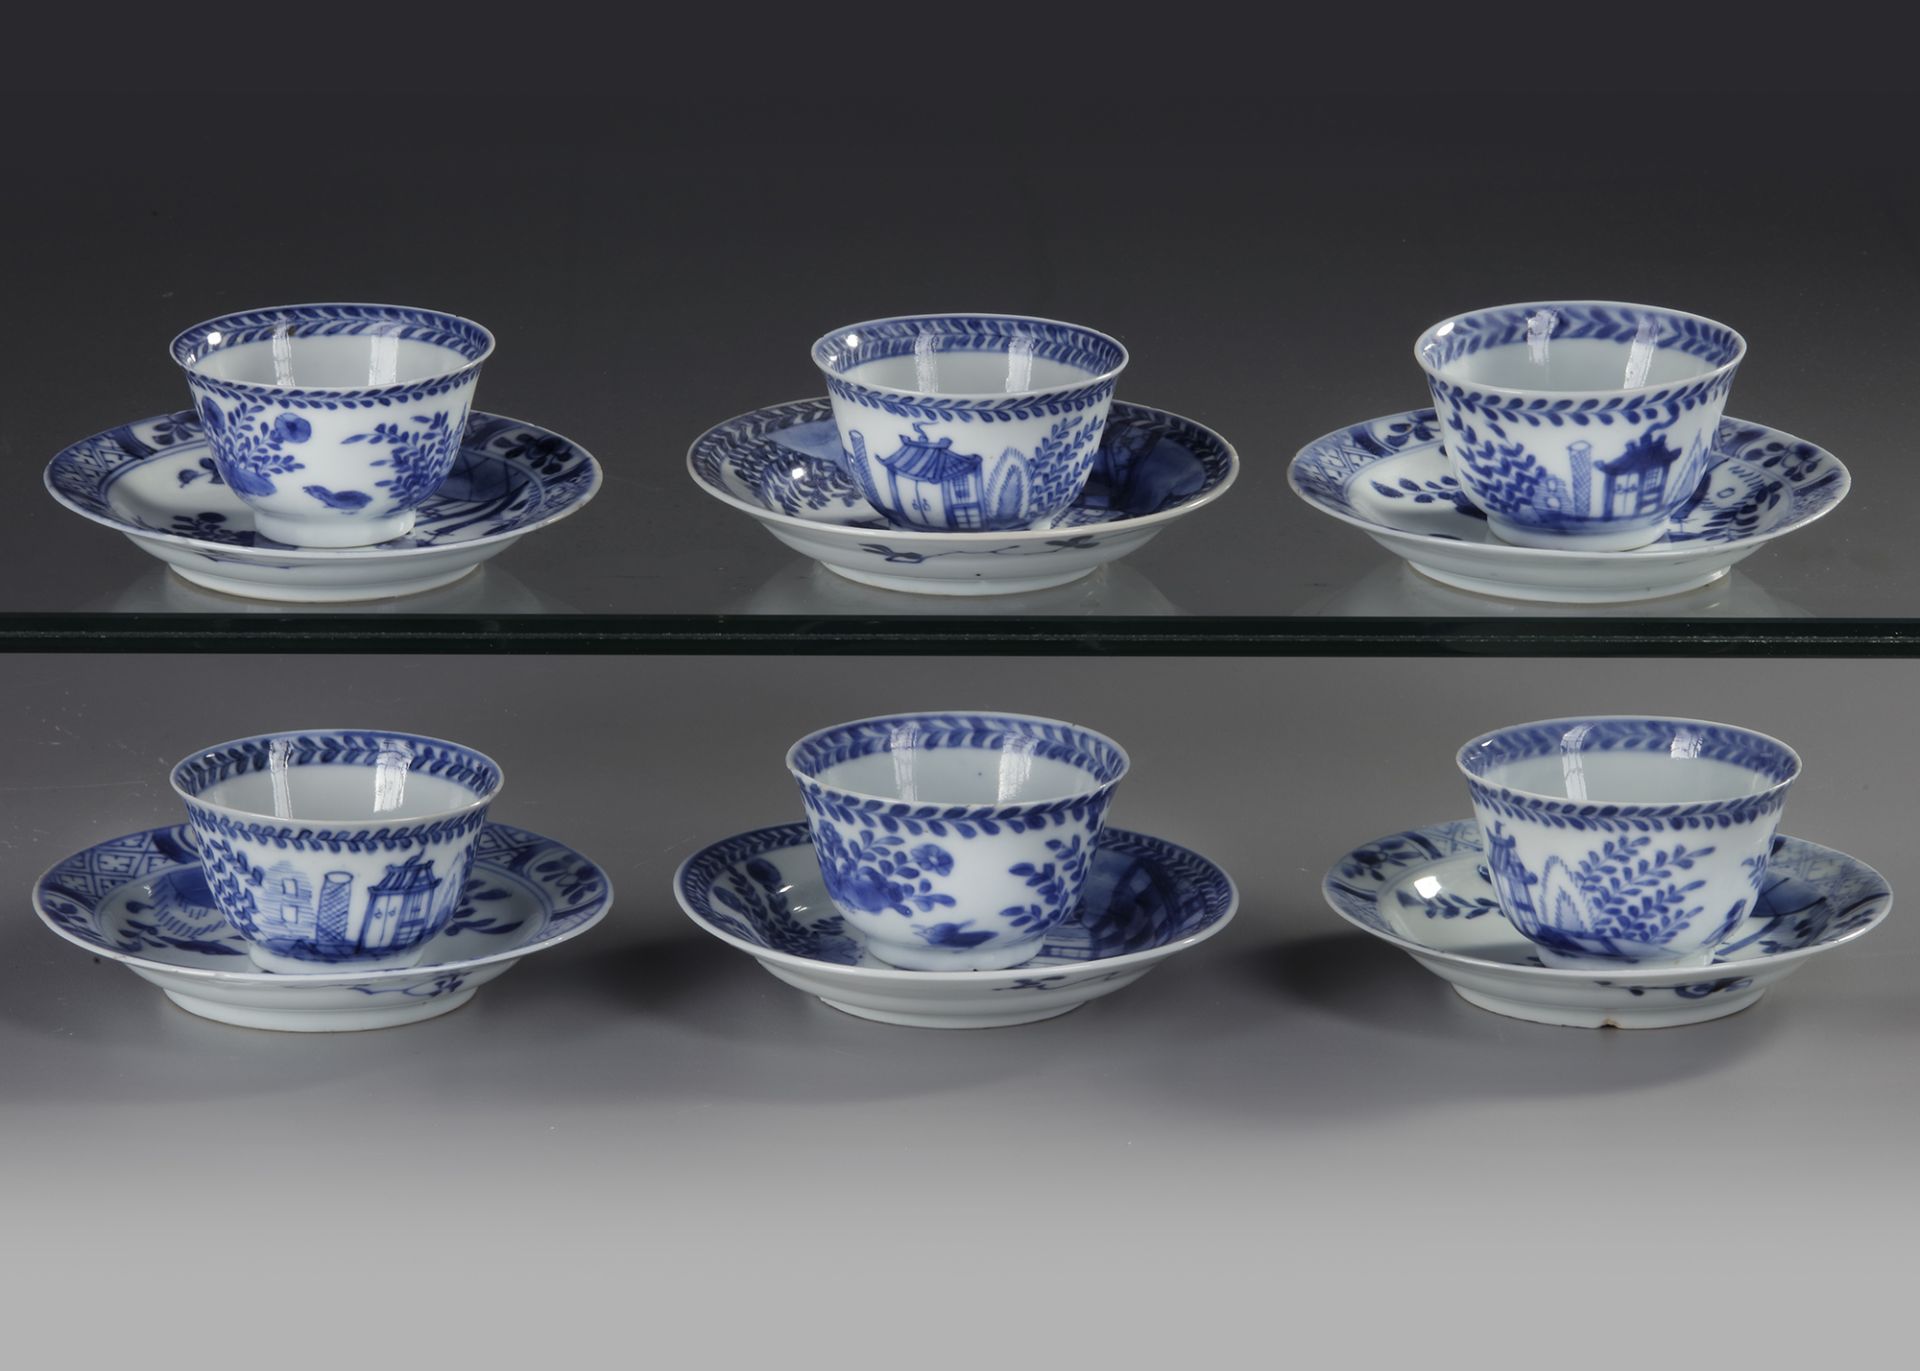 SIX CHINESE BLUE AND WHITE 'CUCKOO IN THE HOUSE' CUPS AND SAUCERS, 18TH CENTURY - Image 3 of 4